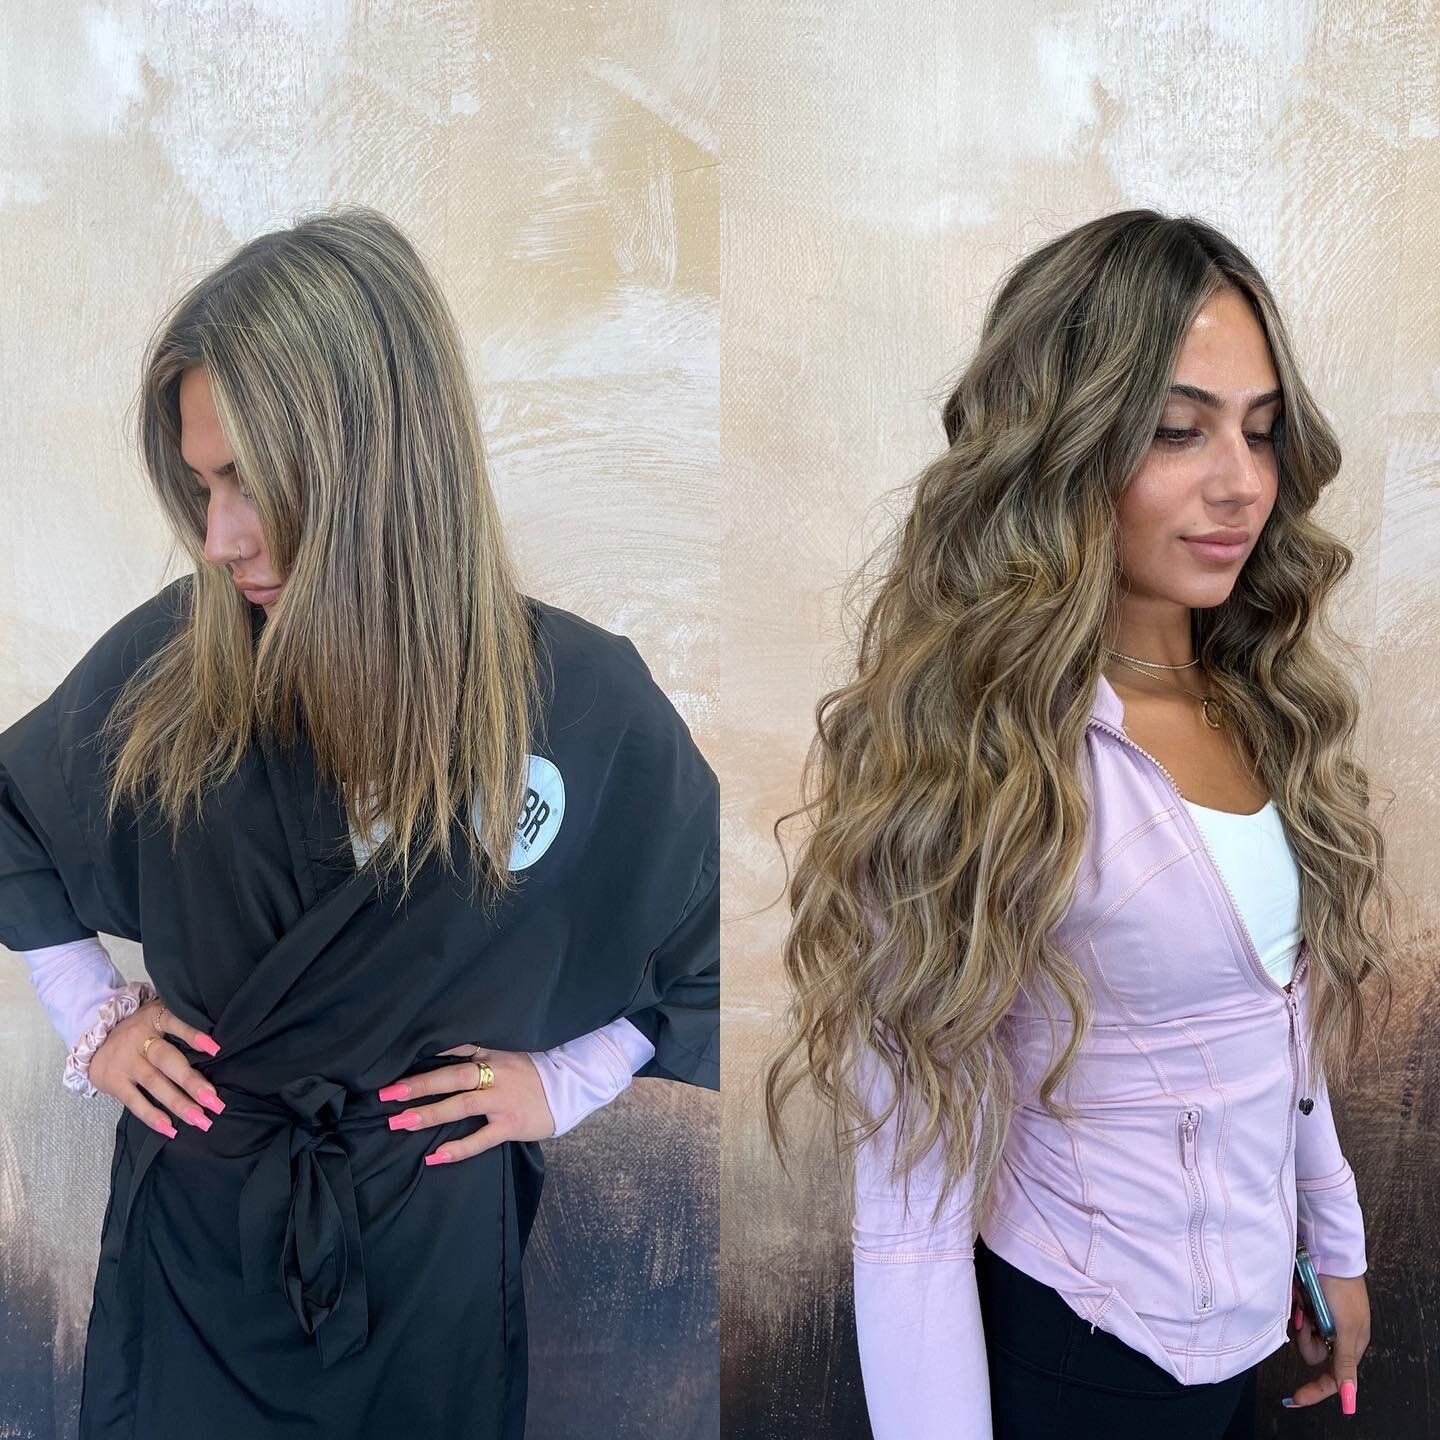 Transform your look, transform your life! ✨
⠀
Experience the magic of NBR hair extensions. Special deals are now on offer, making this the perfect moment to take the leap. Slide into our DMs and we'll find the ideal solution for you.
⠀
Treat yourself